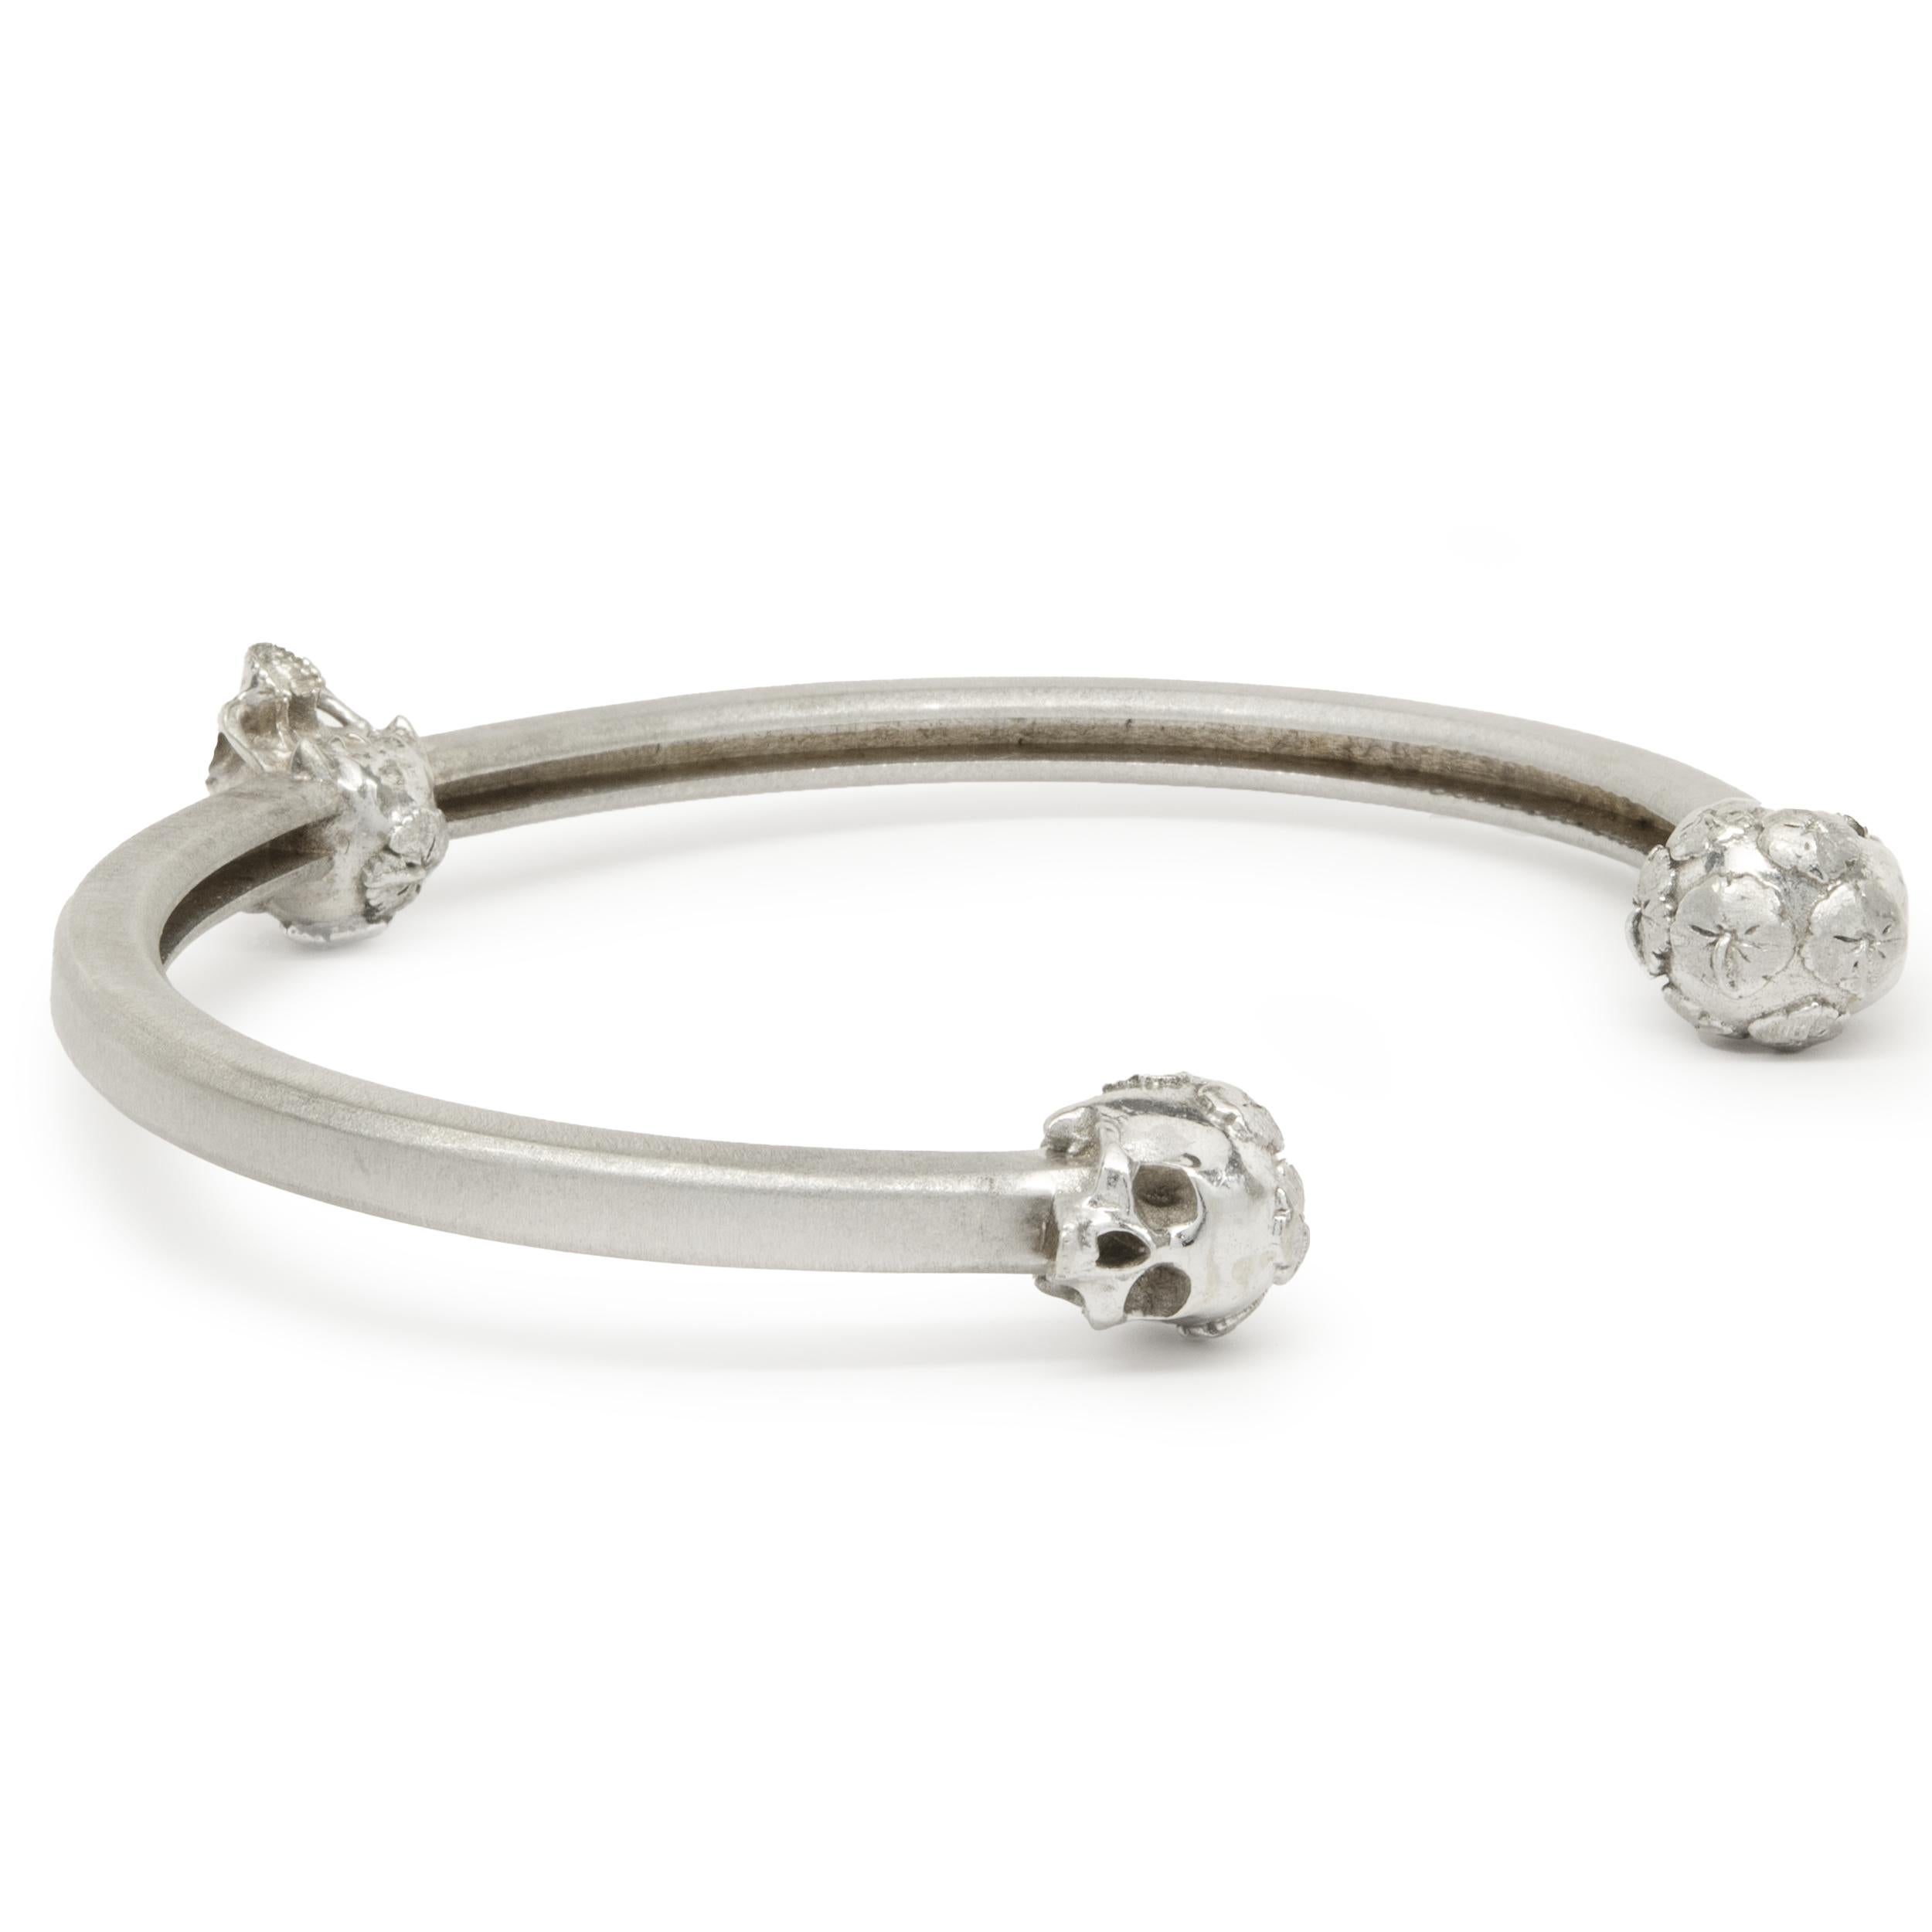 Designer: custom 
Material: 14K white gold
Dimensions: bracelet will fit up to an 8-inches wrist 
Weight: 33.84 grams